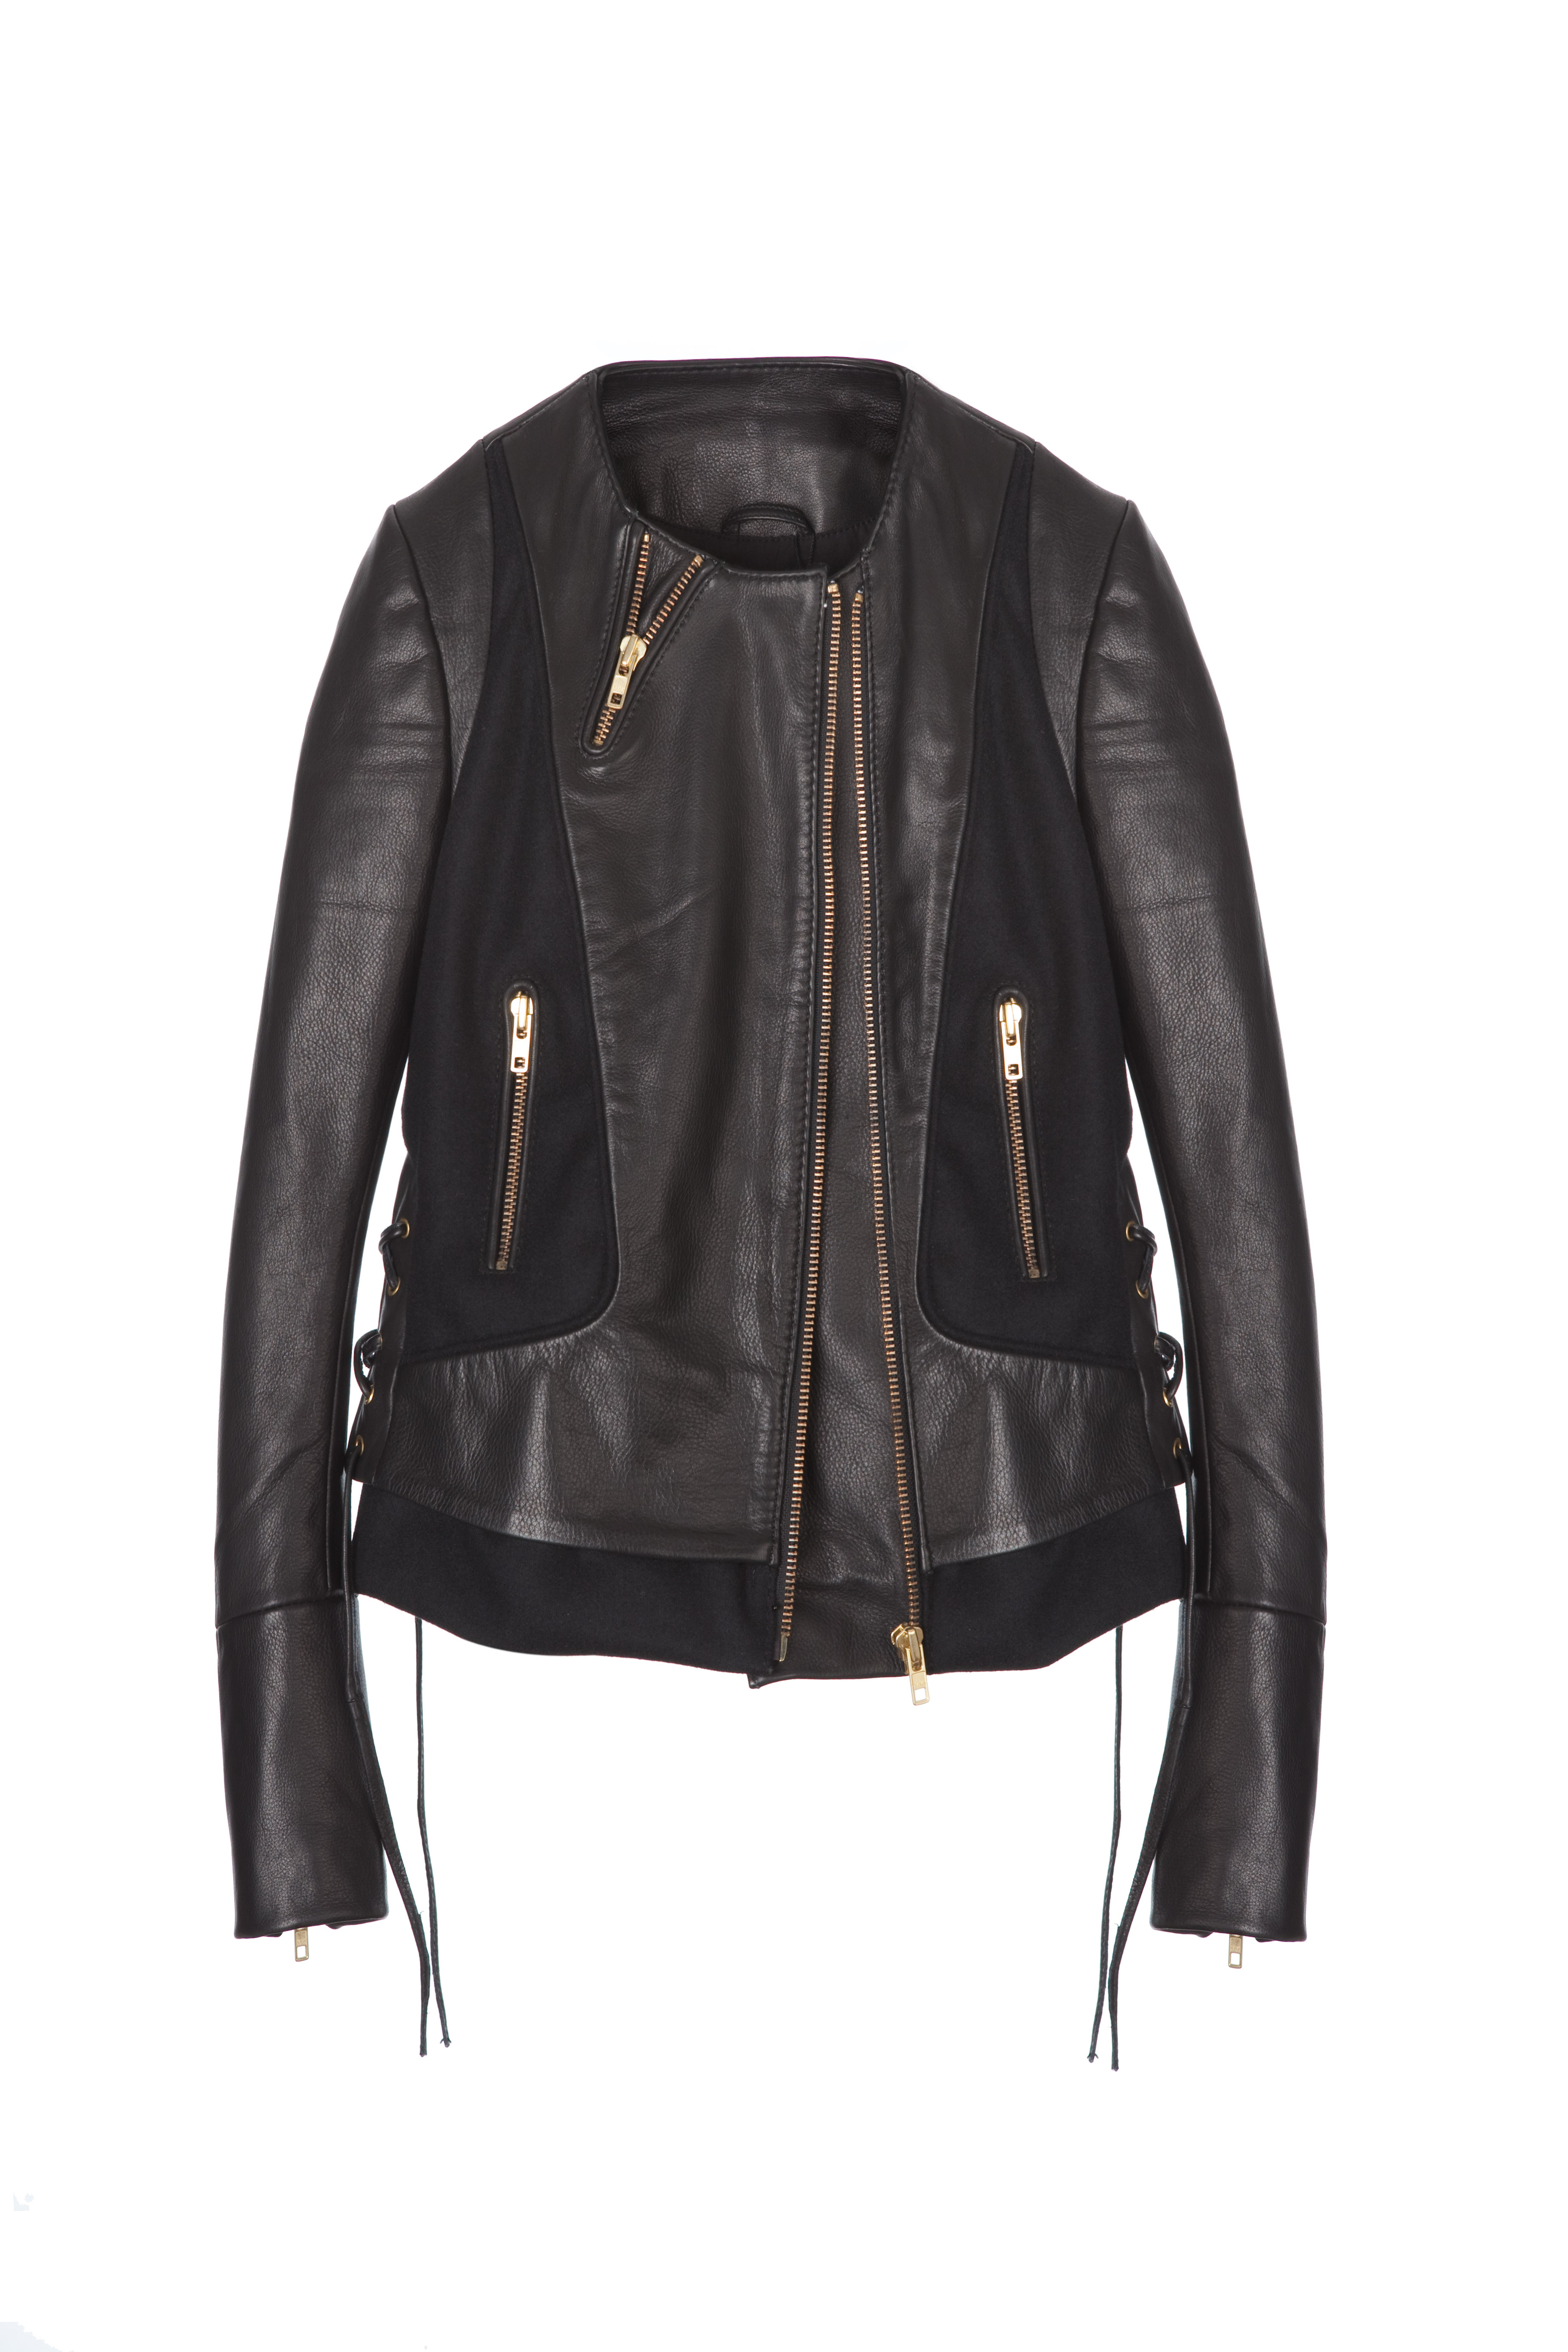 In Love With Leather. The Trend That Won't Go Away. | HuffPost UK Style